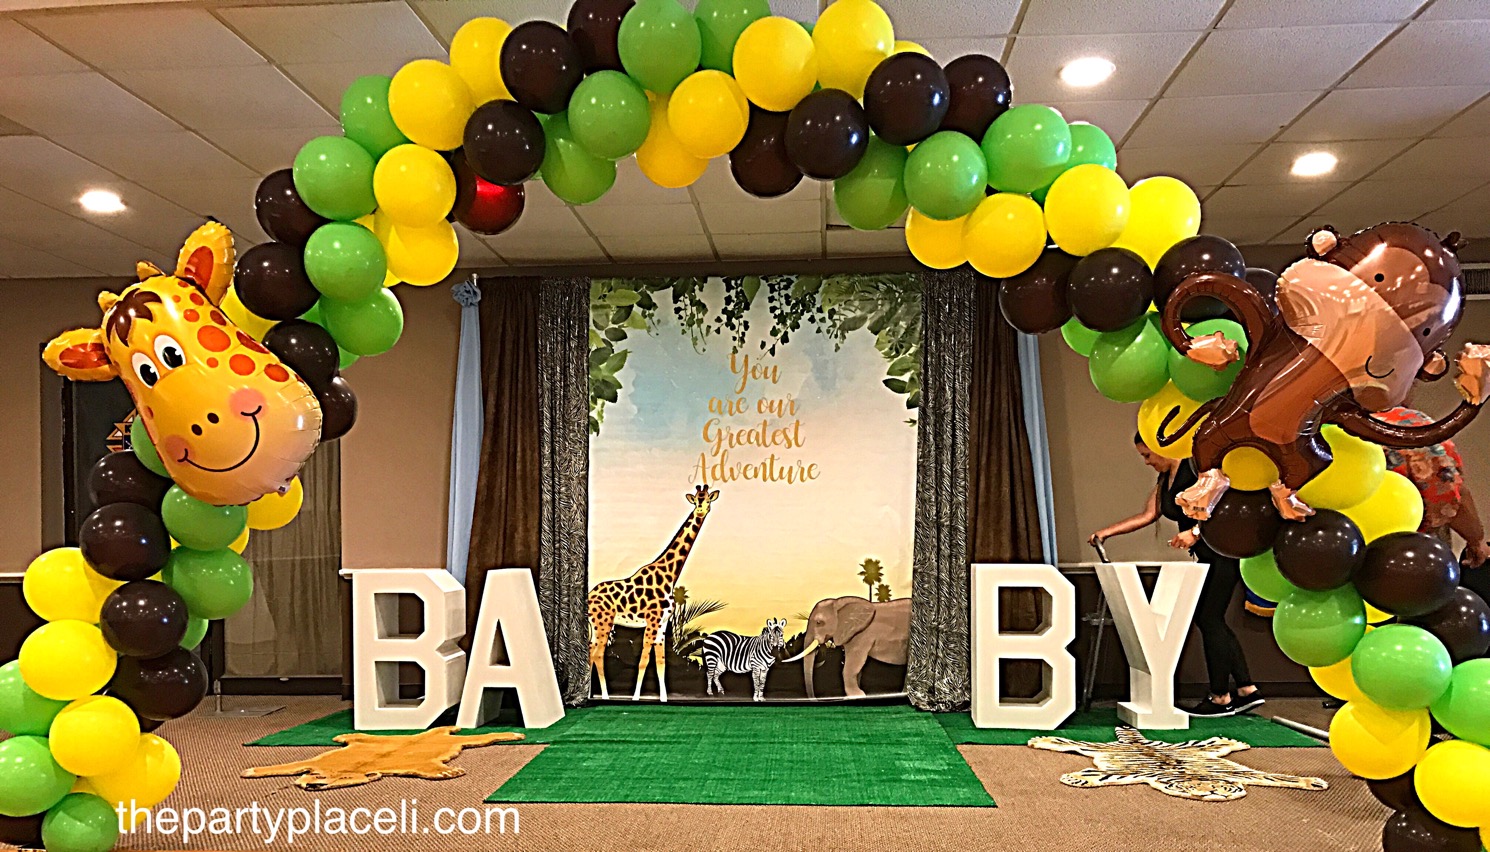 Baby shower letters and balloon arch